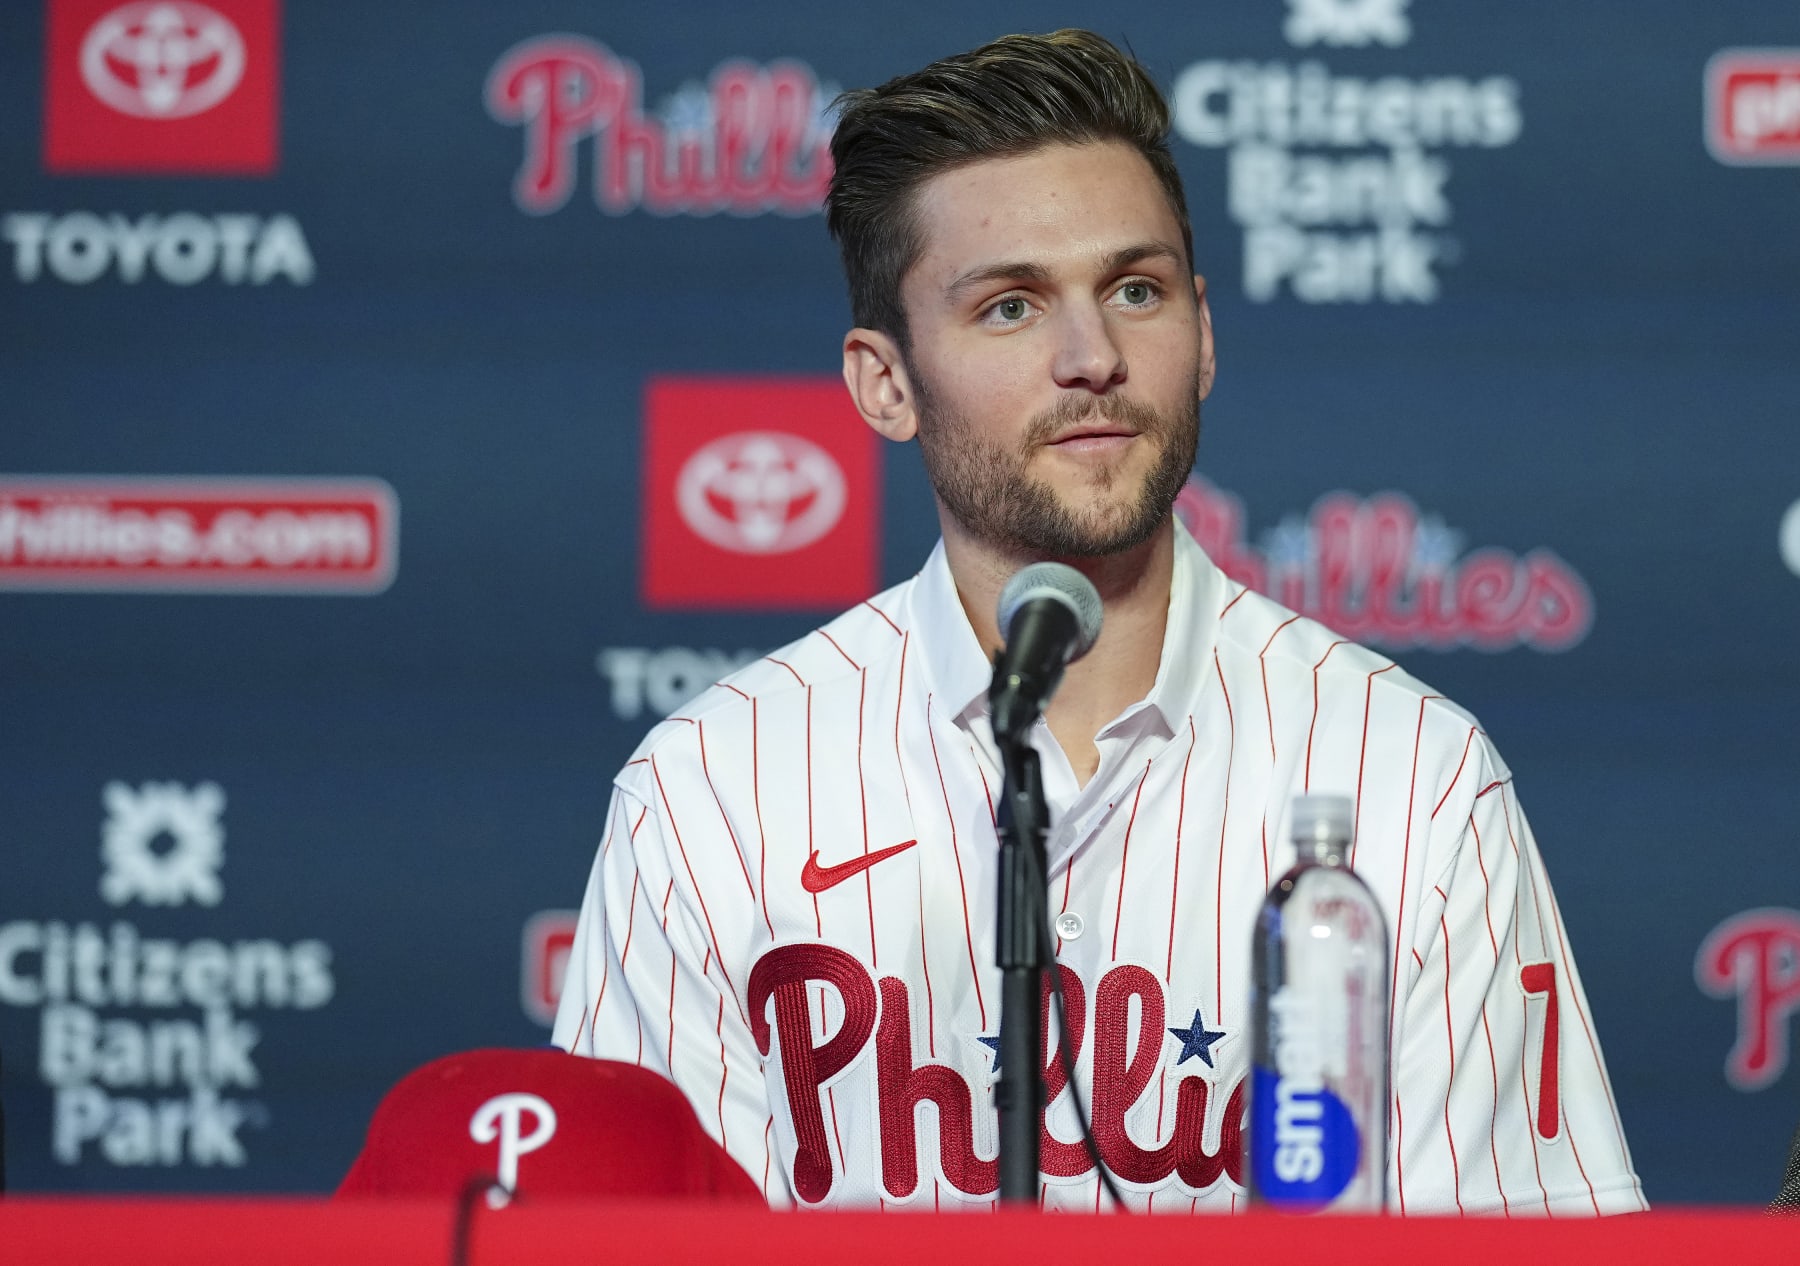 There's real brotherly love for the @phillies' two biggest stars, Bryce  Harper and Trea Turner. Watch as they take on the Braves tonight…